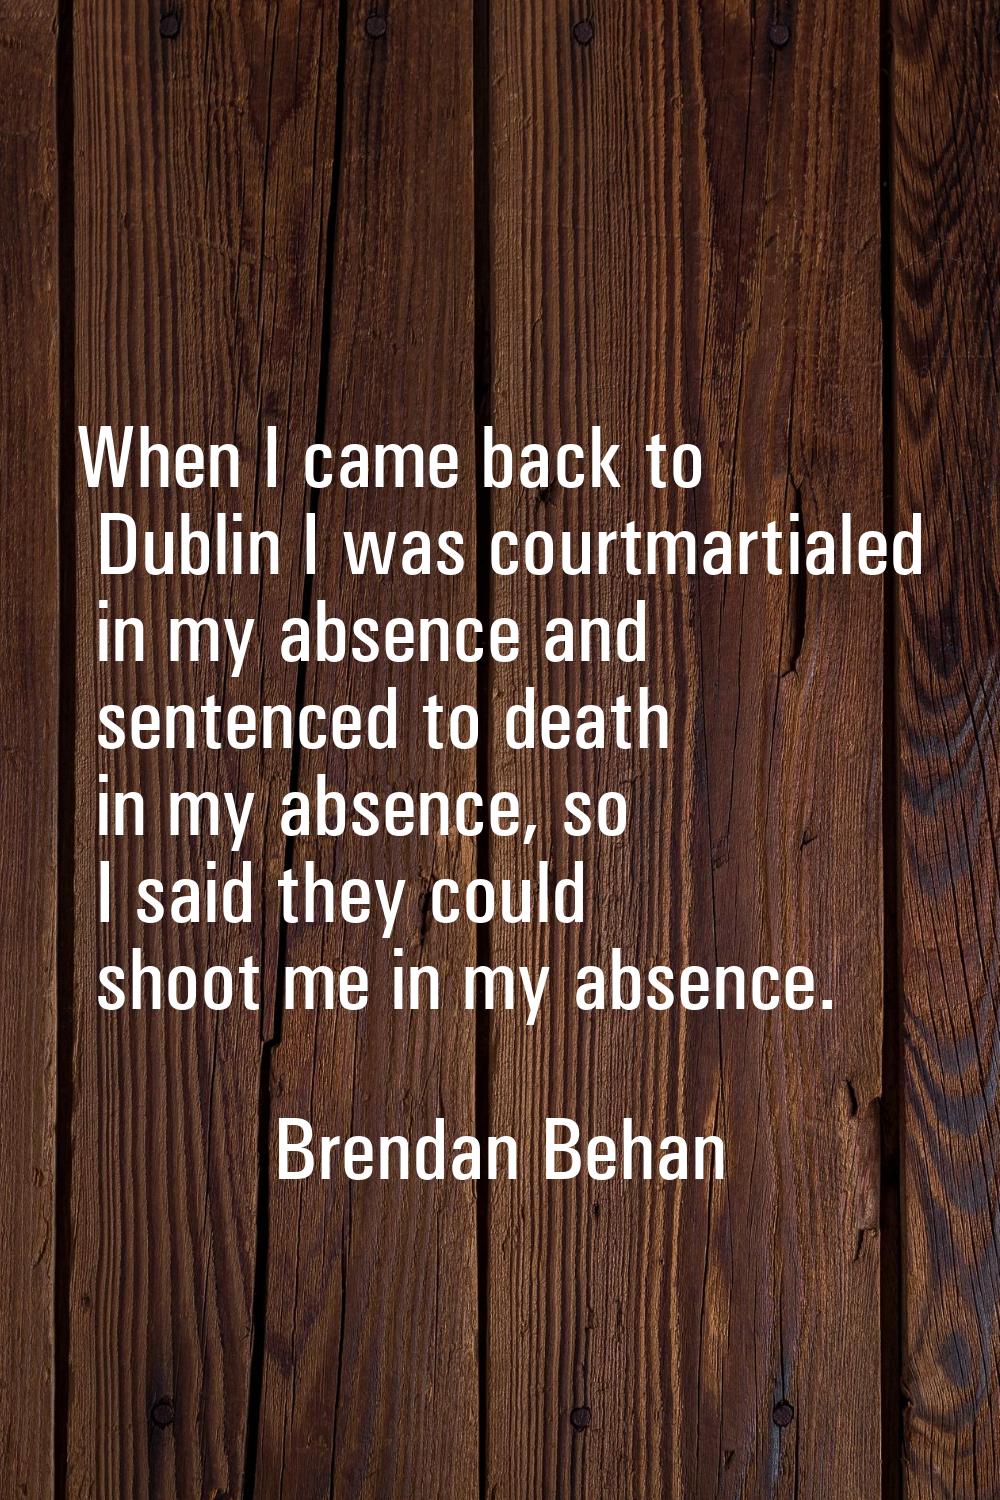 When I came back to Dublin I was courtmartialed in my absence and sentenced to death in my absence,